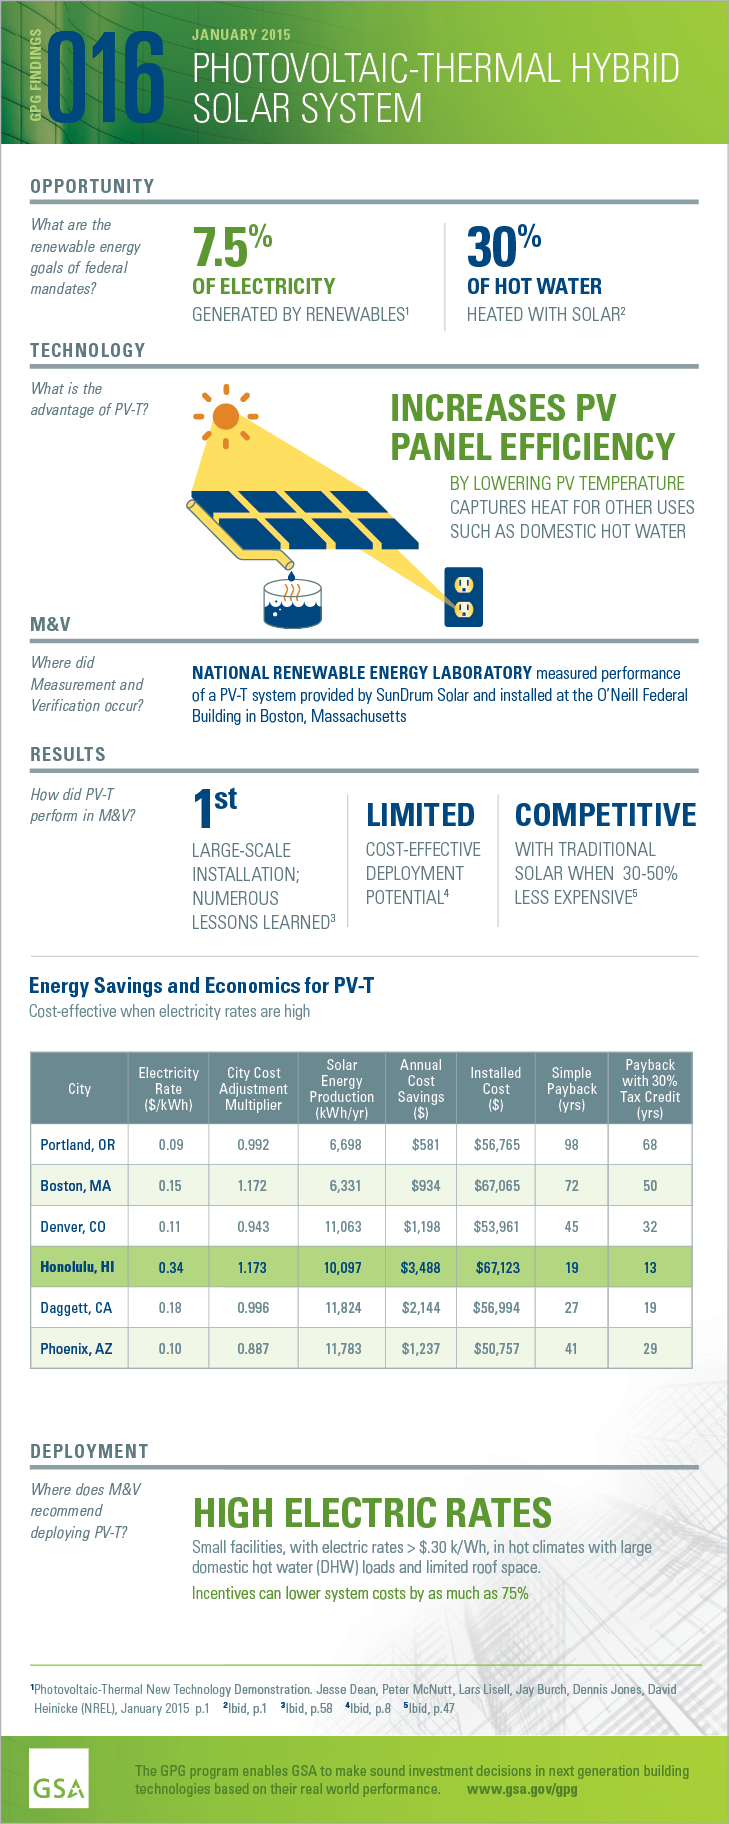 GPG Findings 016, January 2015, PHOTOVOLTAIC-THERMAL HYBRID SOLAR SYSTEM. Opportunity: What are therenewable energy goals of federal mandates? 7.5% OF ELECTRICTY GENERATED BY RENEWABLES.30% OF HOT WATER HEATED WITH SOLAR. Technology: What is the advantage of PV-T? INCREASES PV PANEL EFFICIENCY BY LOWERING PV TEMPERATURE CAPTURES HEAT FOR OTHER USES SUCH AS DOMESTIC HOT WATER. Measurement and Verification: Where did M and V occur? NATIONAL RENEWABLE ENERGY LABORATORY measured performance of   a PV-T system installed at the O’Neill Federal Building in Boston, Massachusetts. Results:How did PV-Tperform in M&V? 1st LARGE-SCALE INSTALLATION; NUMEROUS LESSONS LEARNED. LIMITED COST-EFFECTIVE DEPLOYMENT POTENTIAL COMPETITIVE WITH TRADITIONAL SOLAR WHEN 30-50% LESS EXPENSIVE.Cost-effective when electricity rates are high. Deployment: Where does M&V recommend deploying PV-T? HIGH ELECTRIC RATES.Small facilities, with electric rates > $.30 k/Wh, in hot climates with large domestic hot water (DHW) loads and limited roof space. Incentives can lower system costs by as much as 75%